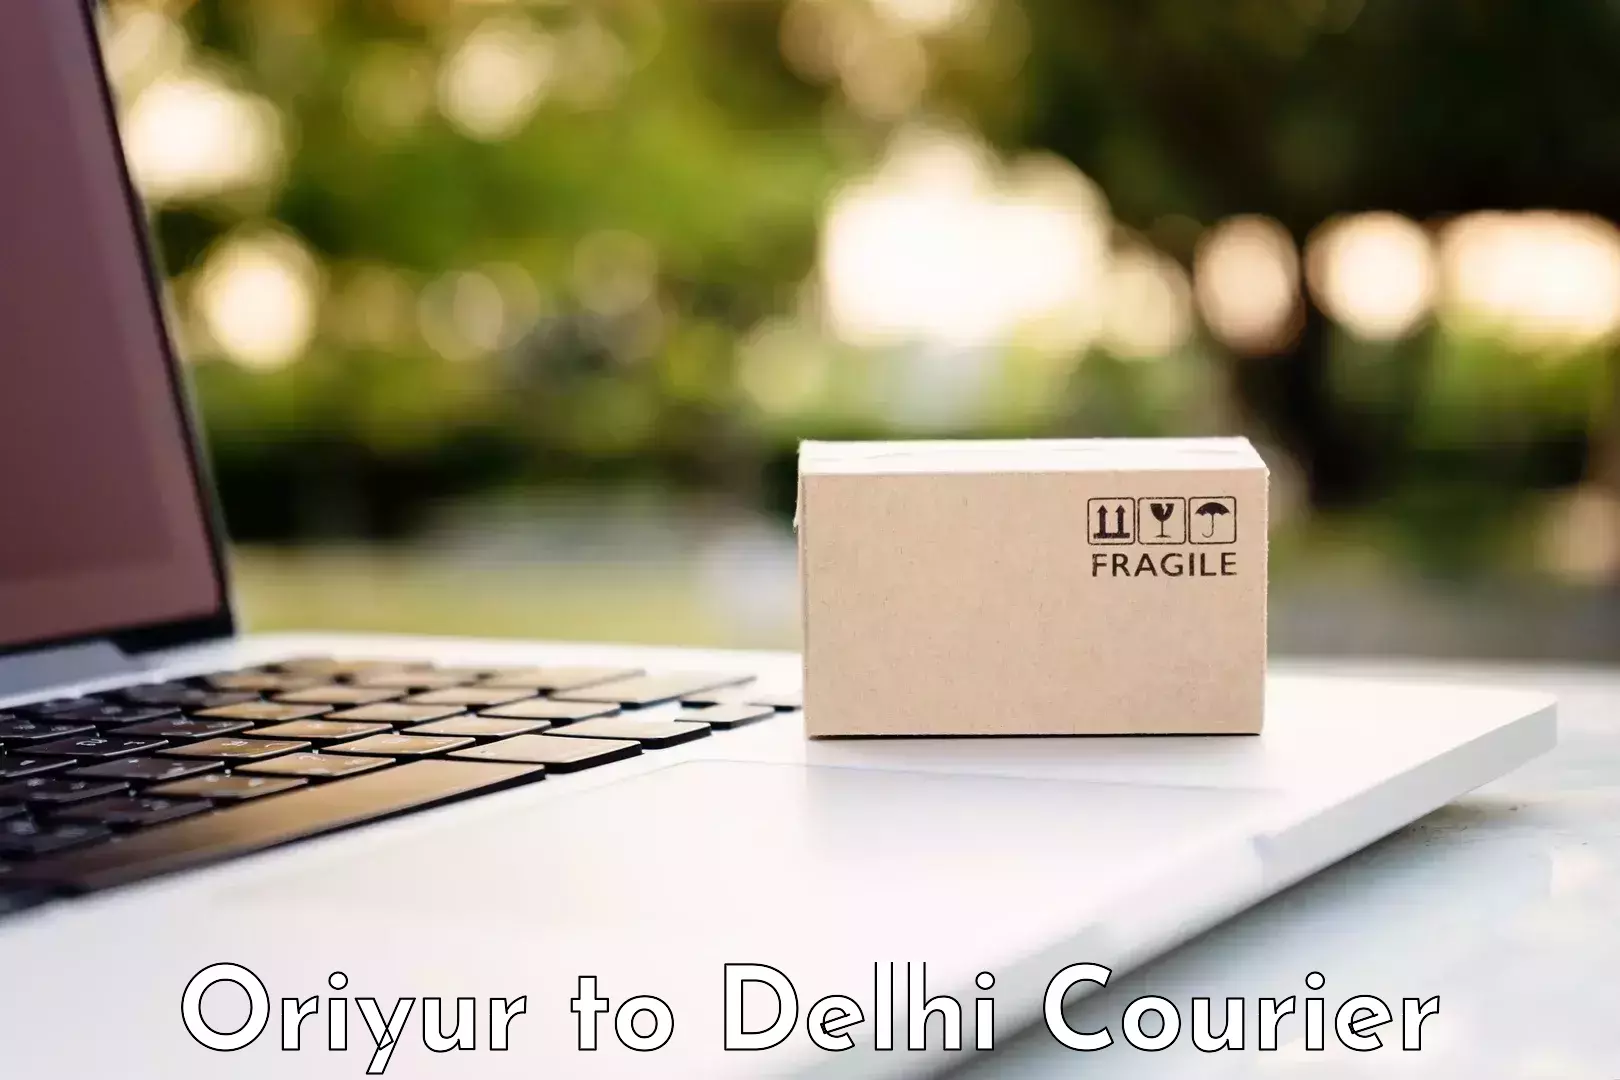 Home goods moving company Oriyur to NCR